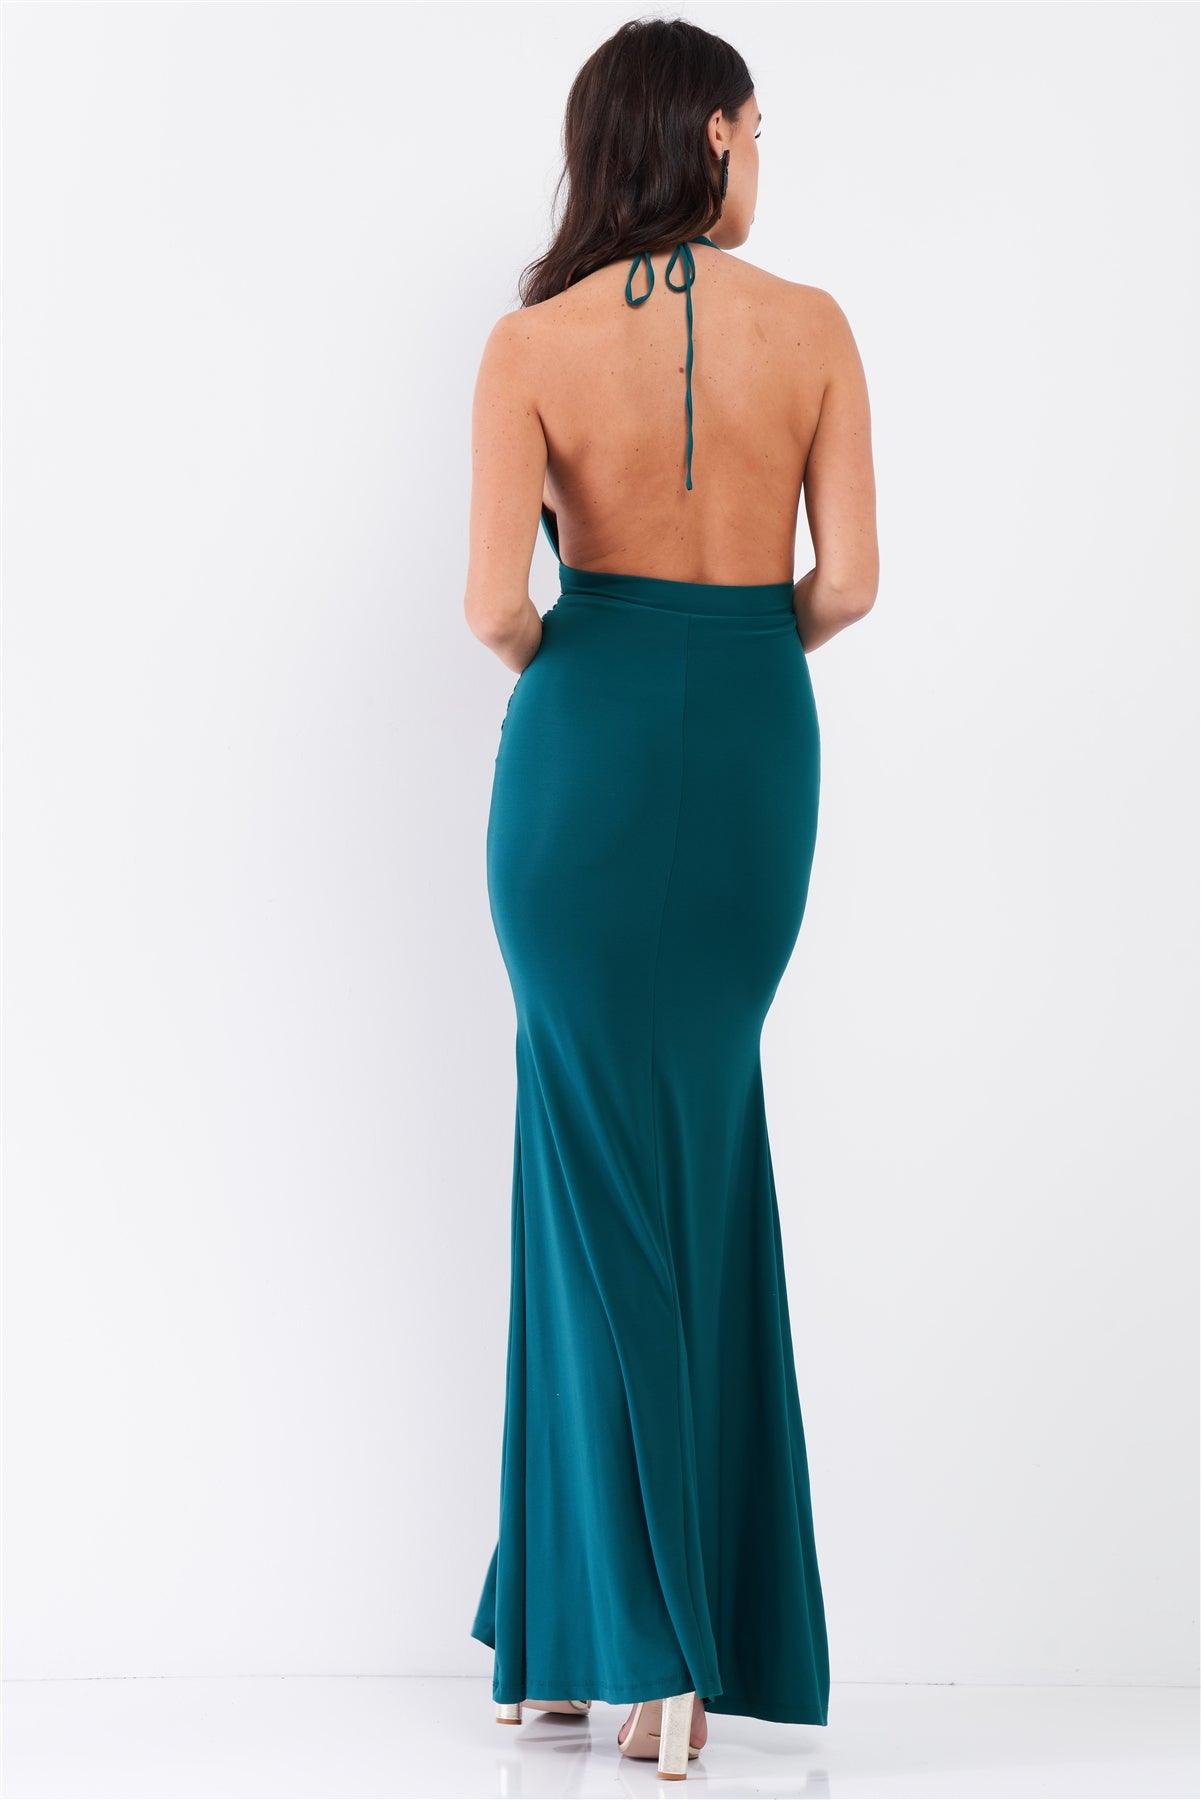 Emerald Halter Neck Front Cut Out Detail Ruched Self-Tie Long Straps Open Back Mermaid Maxi Dress /3-2-1